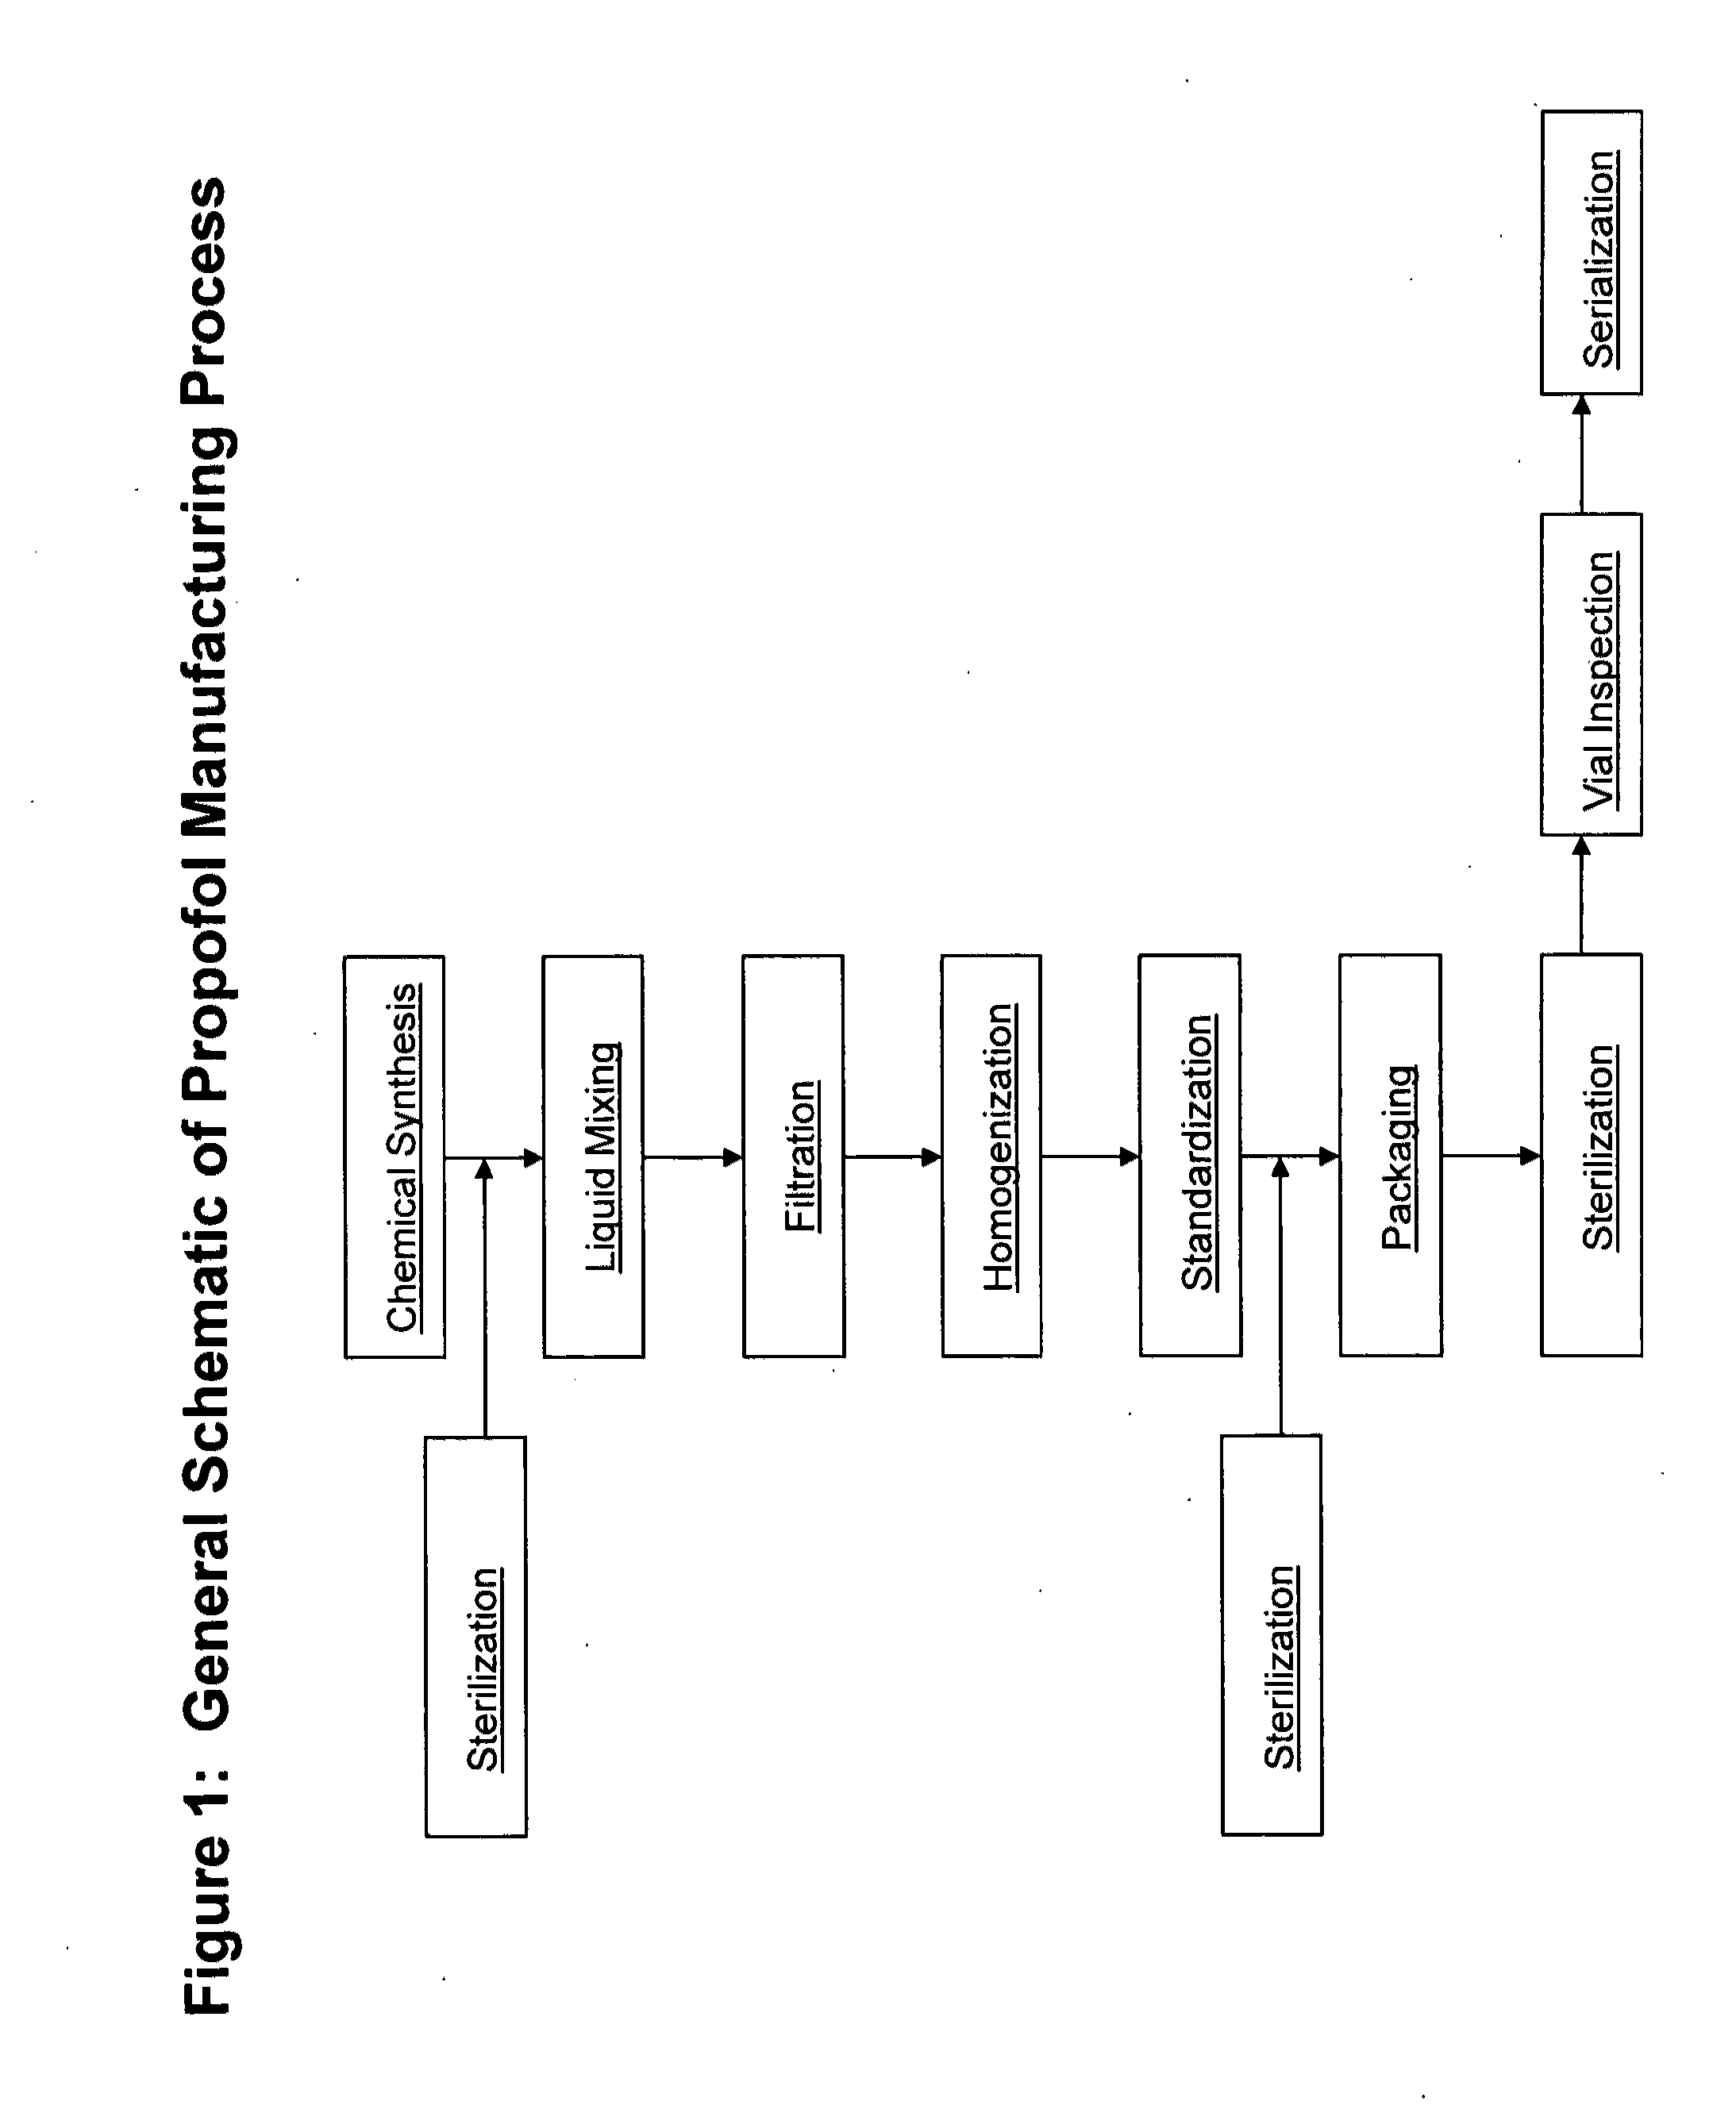 Methods of monitoring propofol through a supply chain